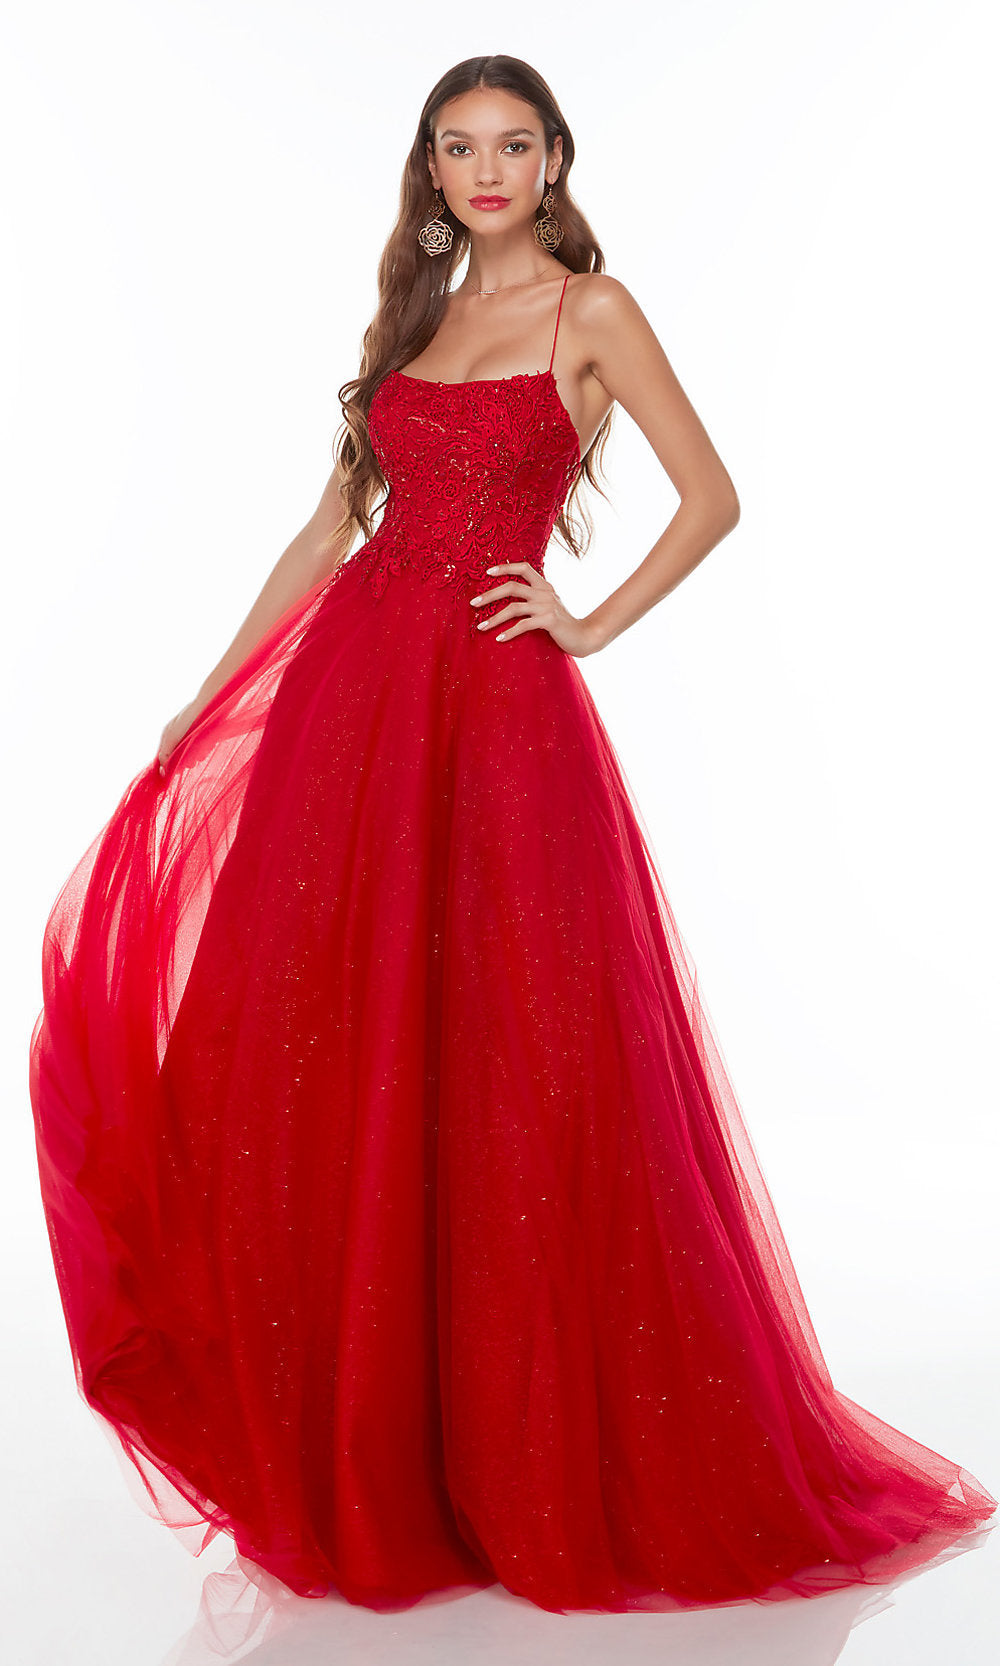 Buy Red Dresses Online in India at Best Price - Westside